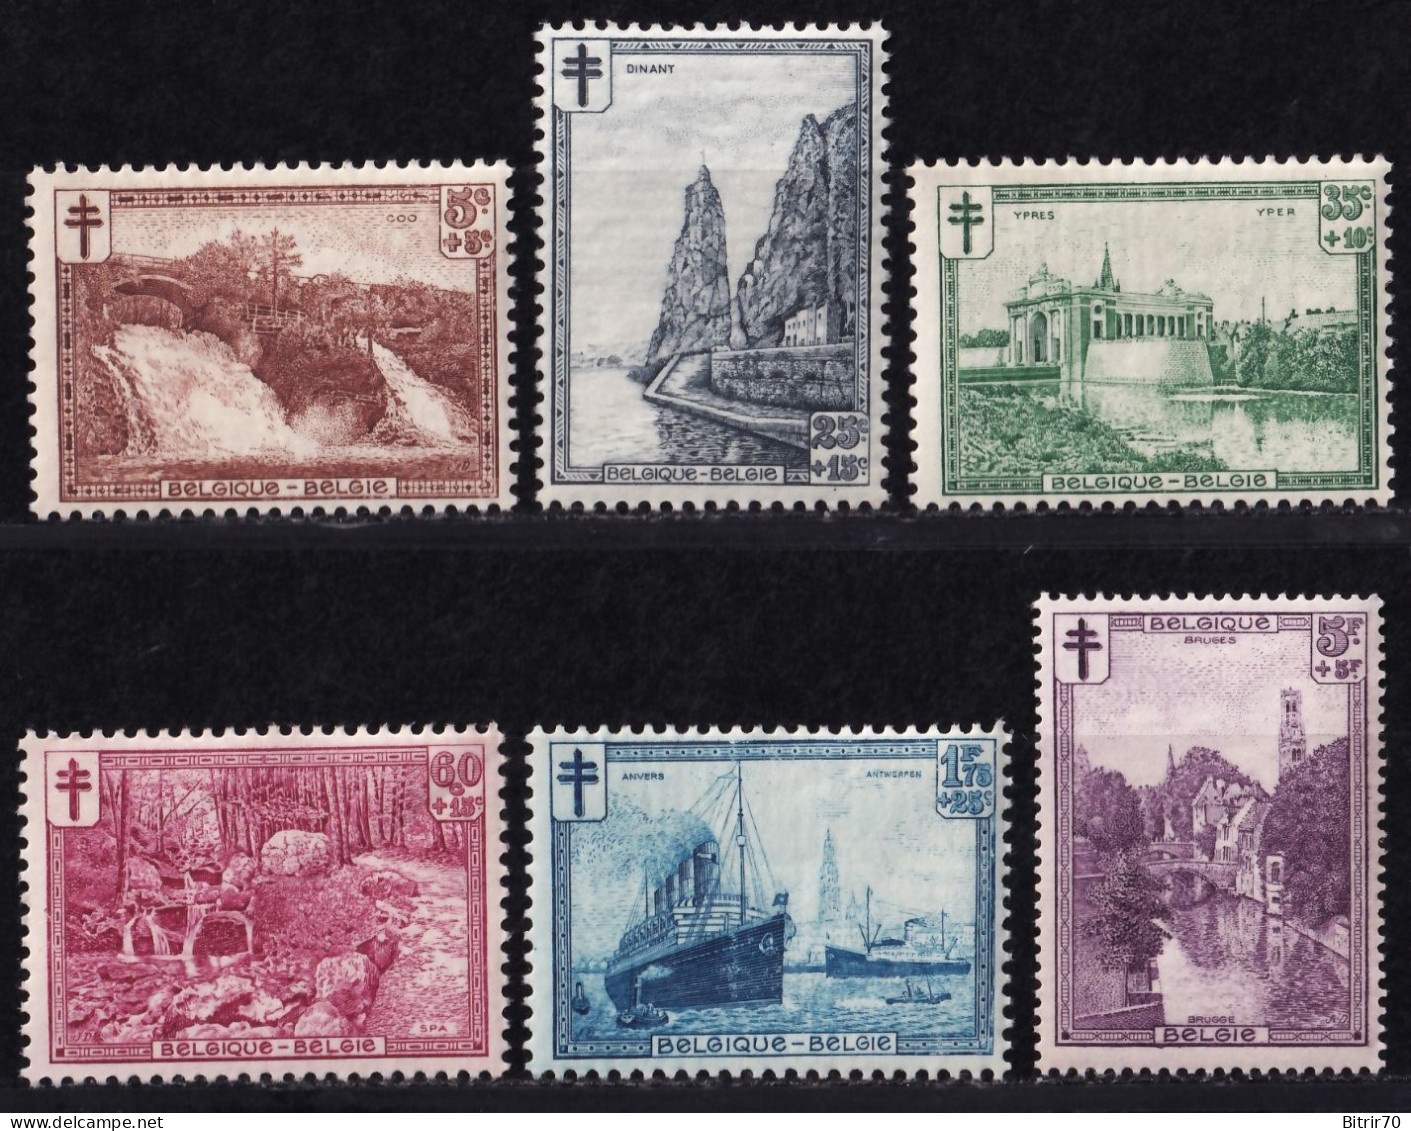 Belgica, 1929  Y&T. 293 / 298, MNH. - Unused Stamps